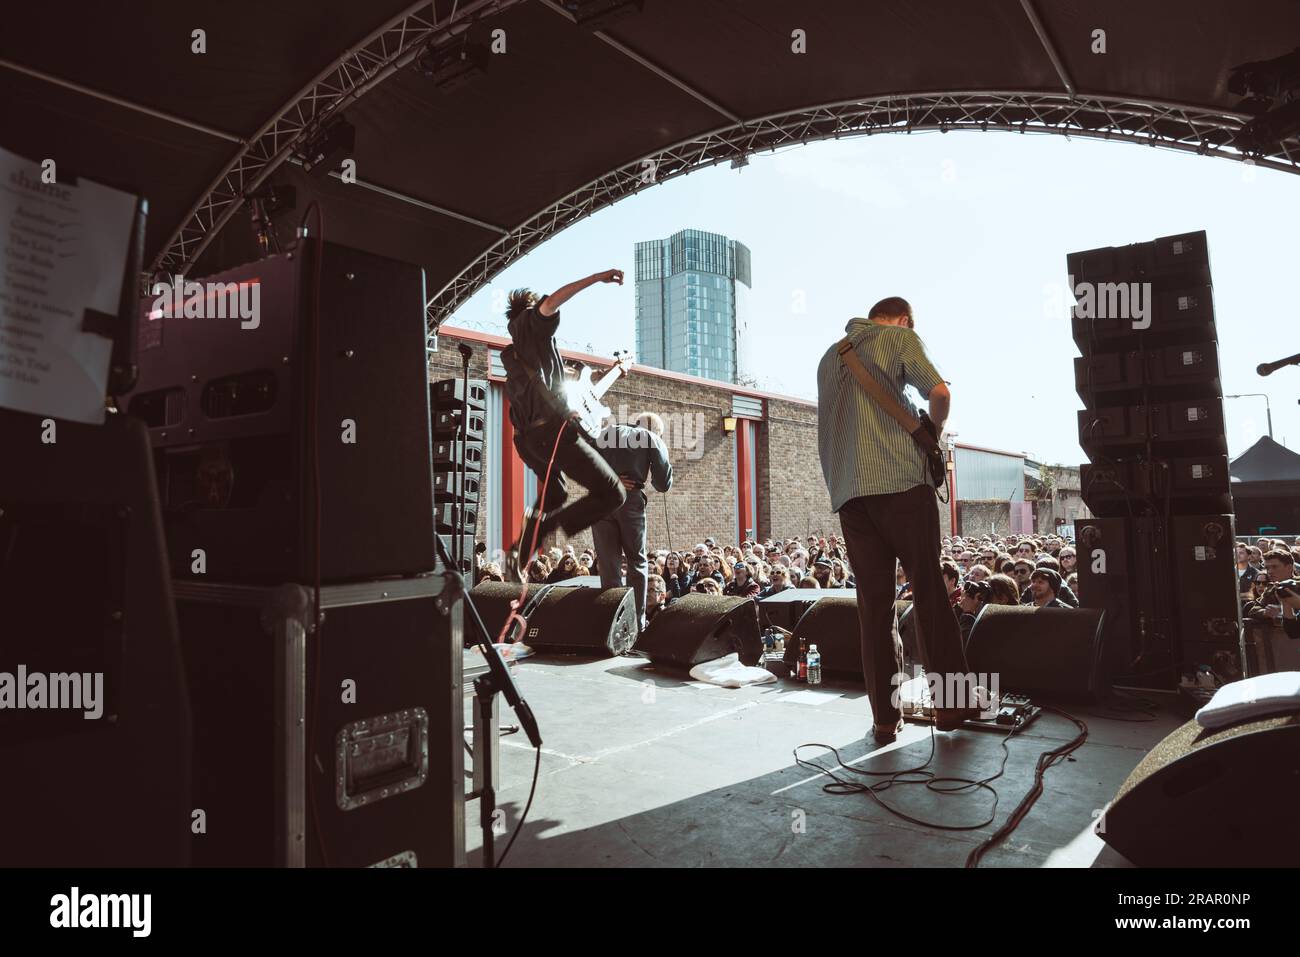 The Shame band played at the New Bird Street stage during the Liverpool Soun CIty on the 4th of May, 2019. Stock Photo